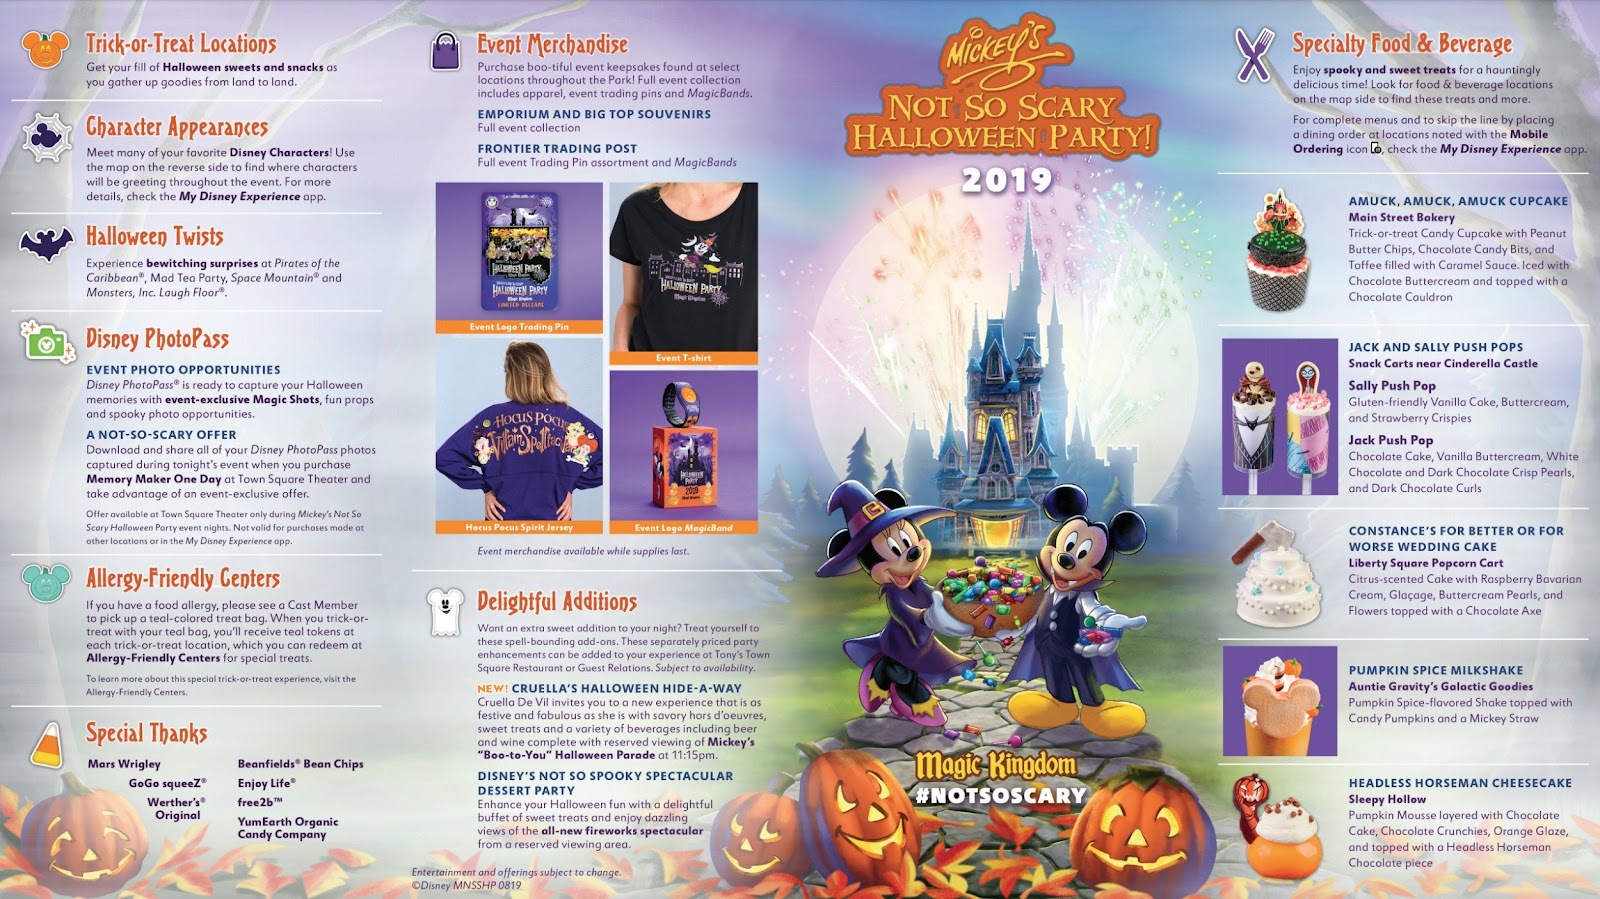 2019 Mickey's Not So Scary Halloween Party Map - front